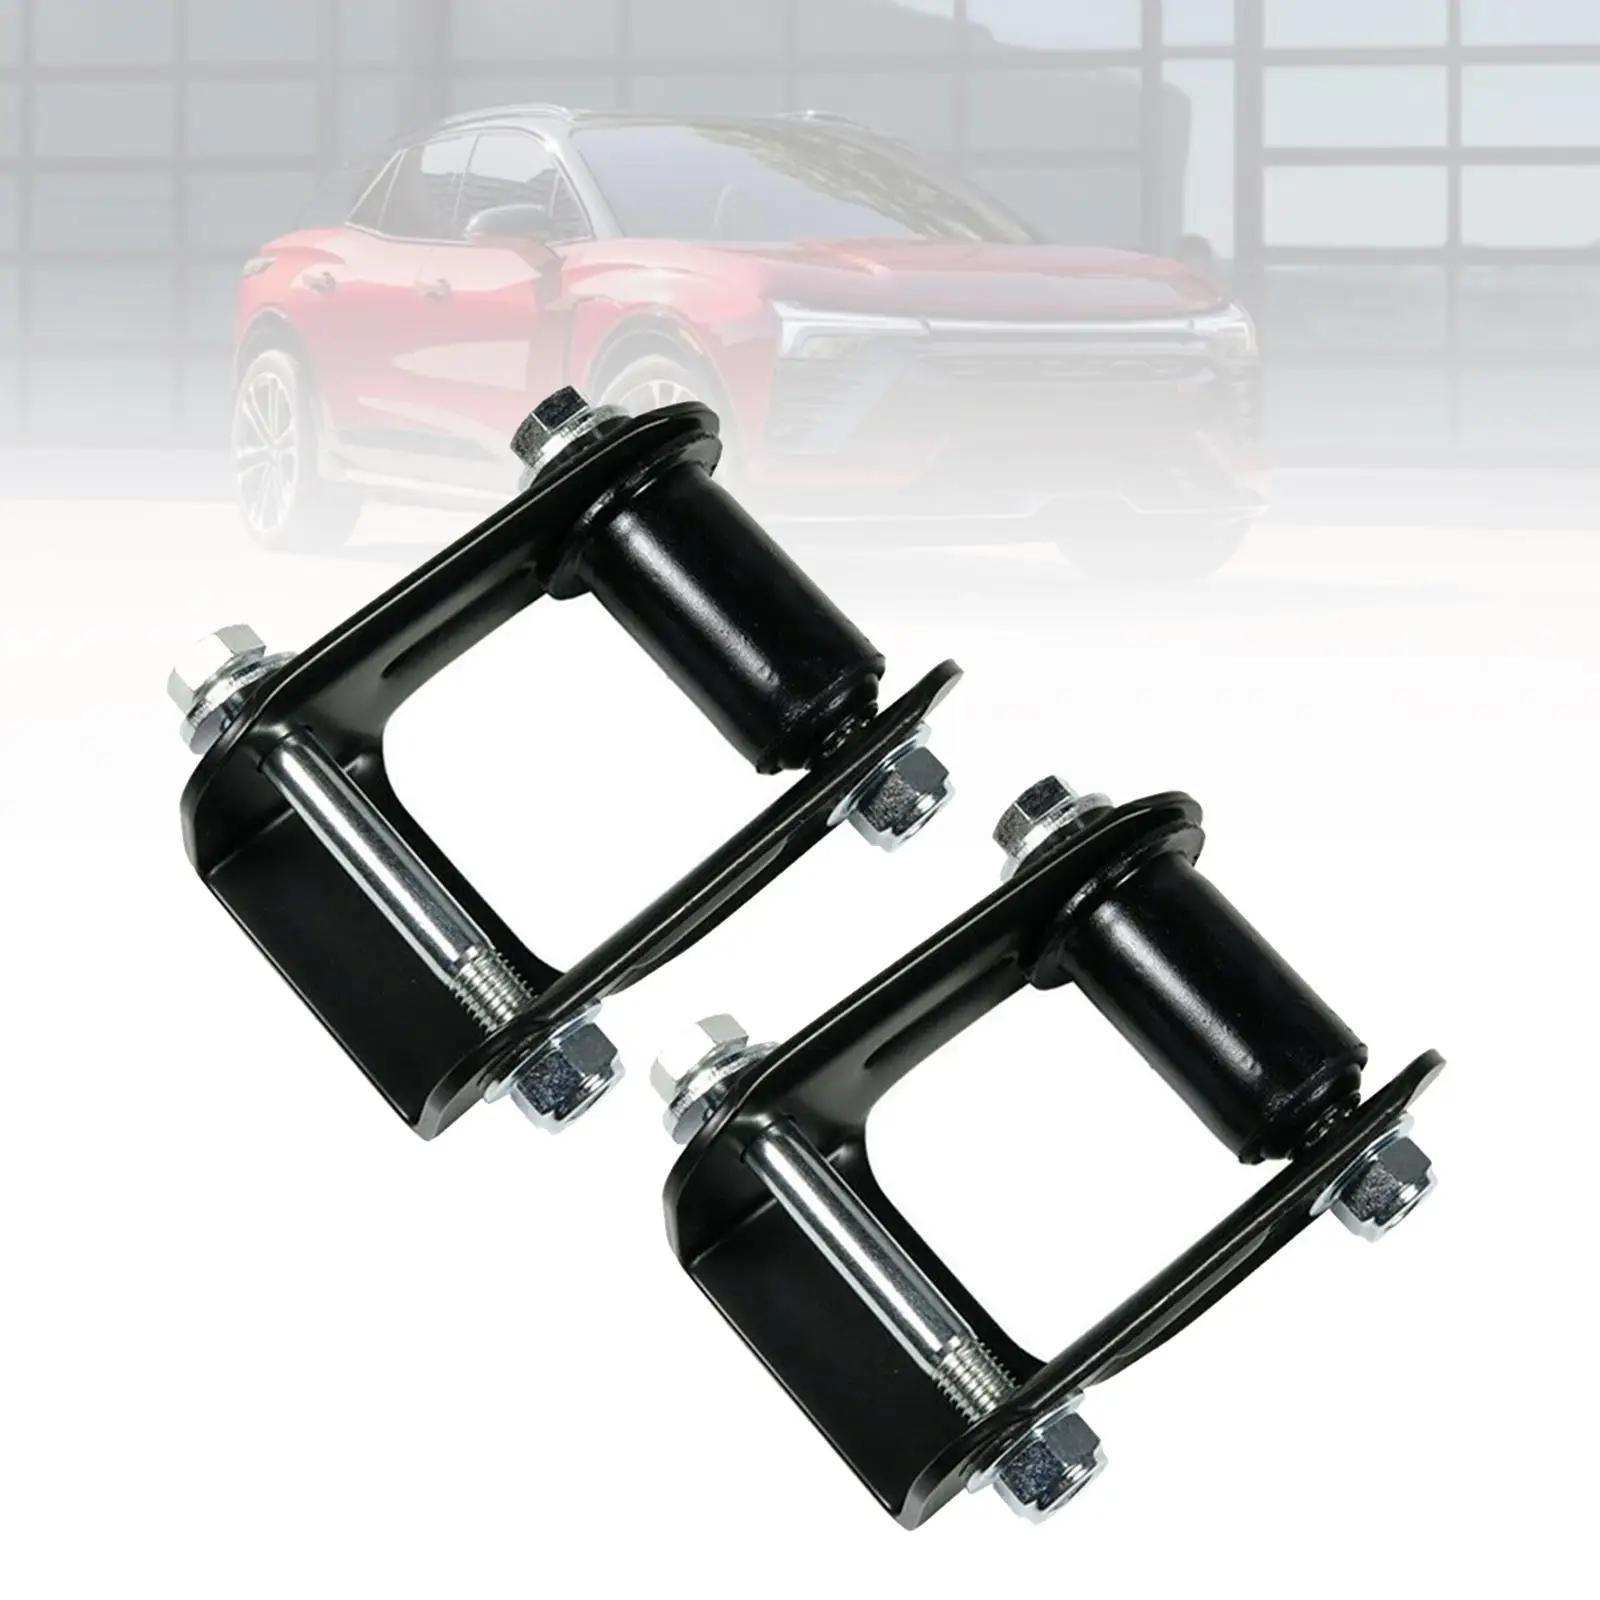 2 Pieces Leaf Spring Shackle Kit Decorative Accessories for Chevrolet